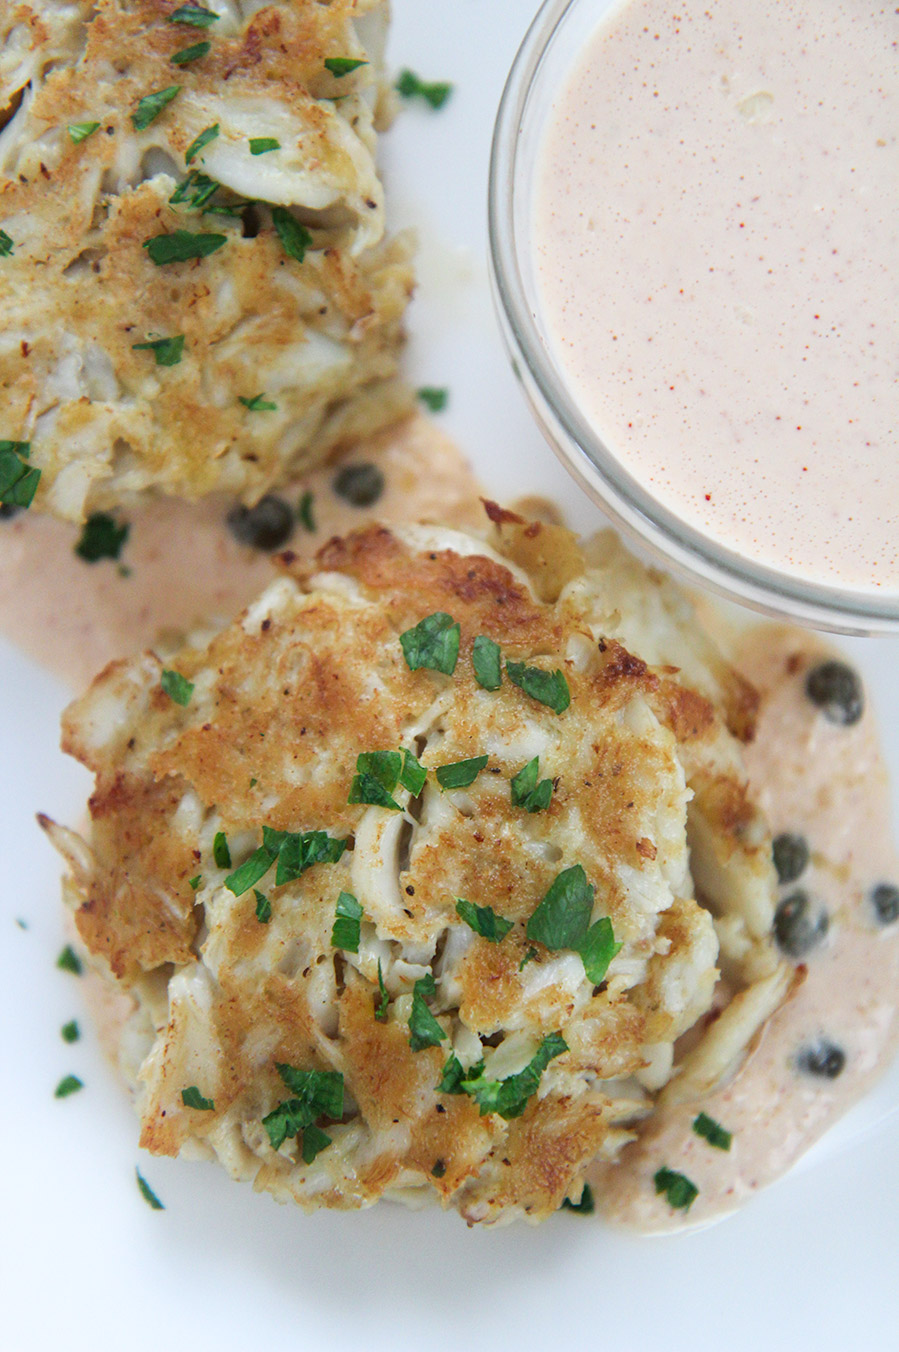 two lump crab cakes with parsley on top and a side of remoulade in a small bowl.